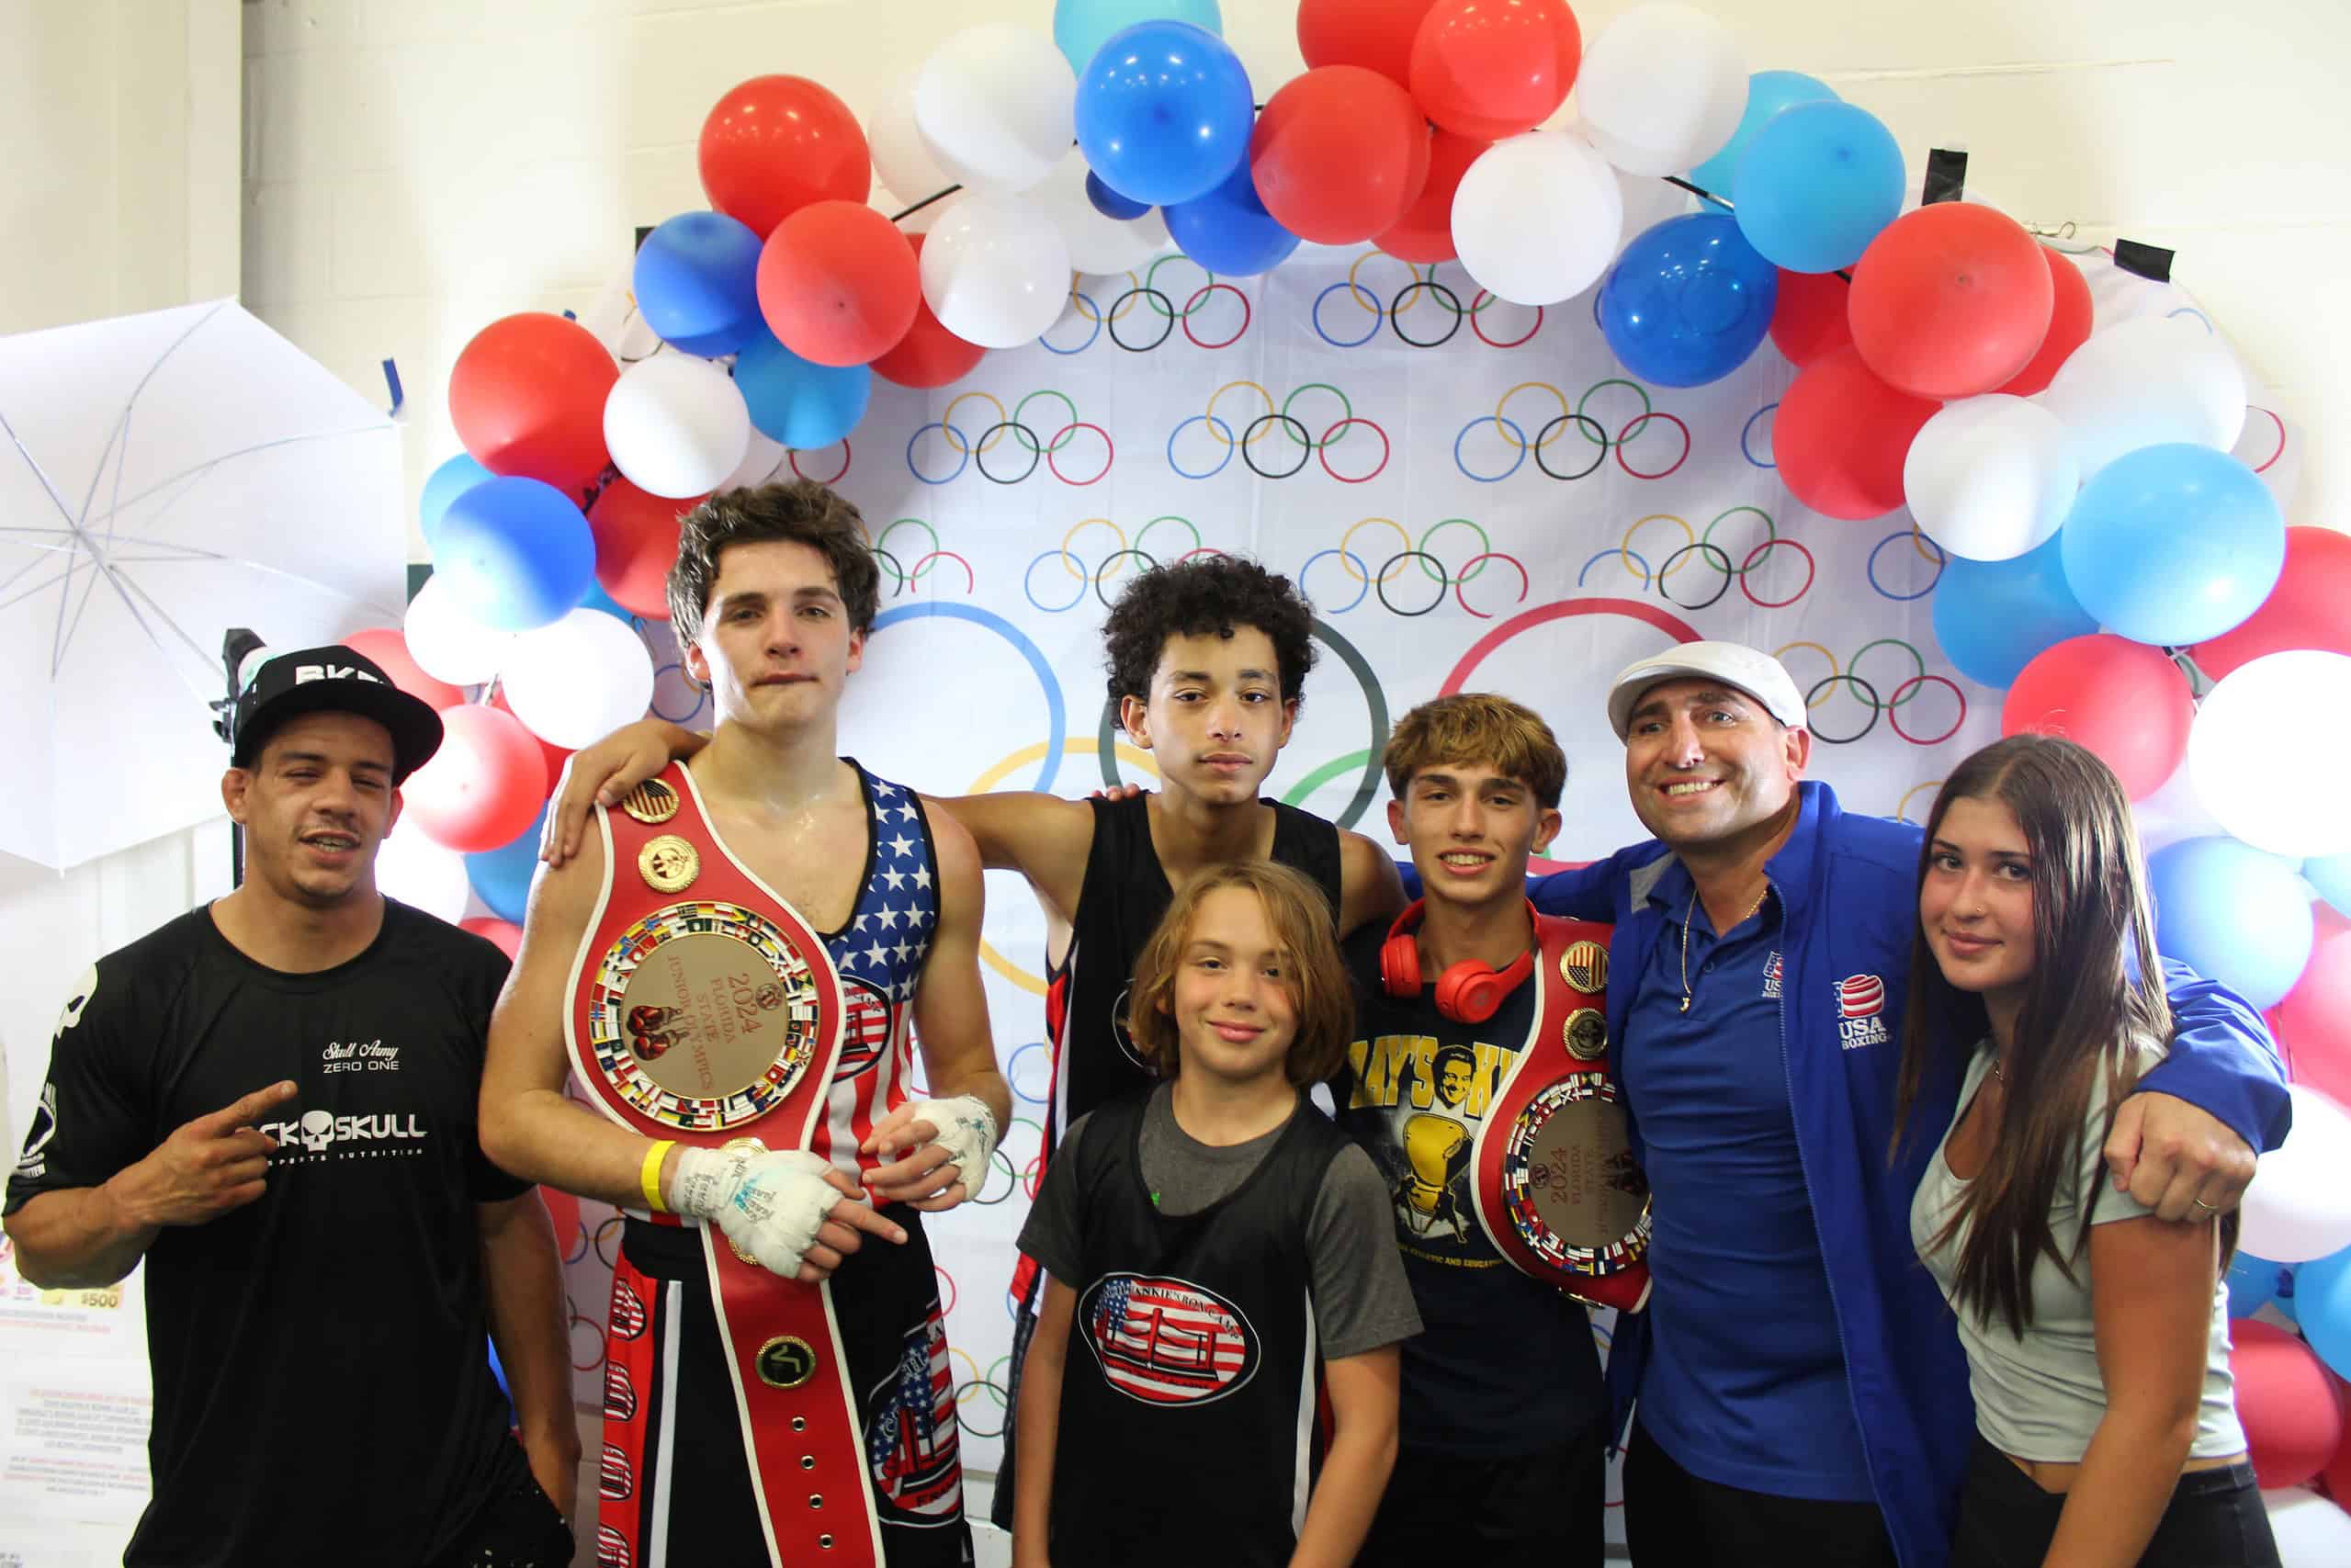 Coach Alagna, fighters, and family pose for pictures during the Junior Olympics.